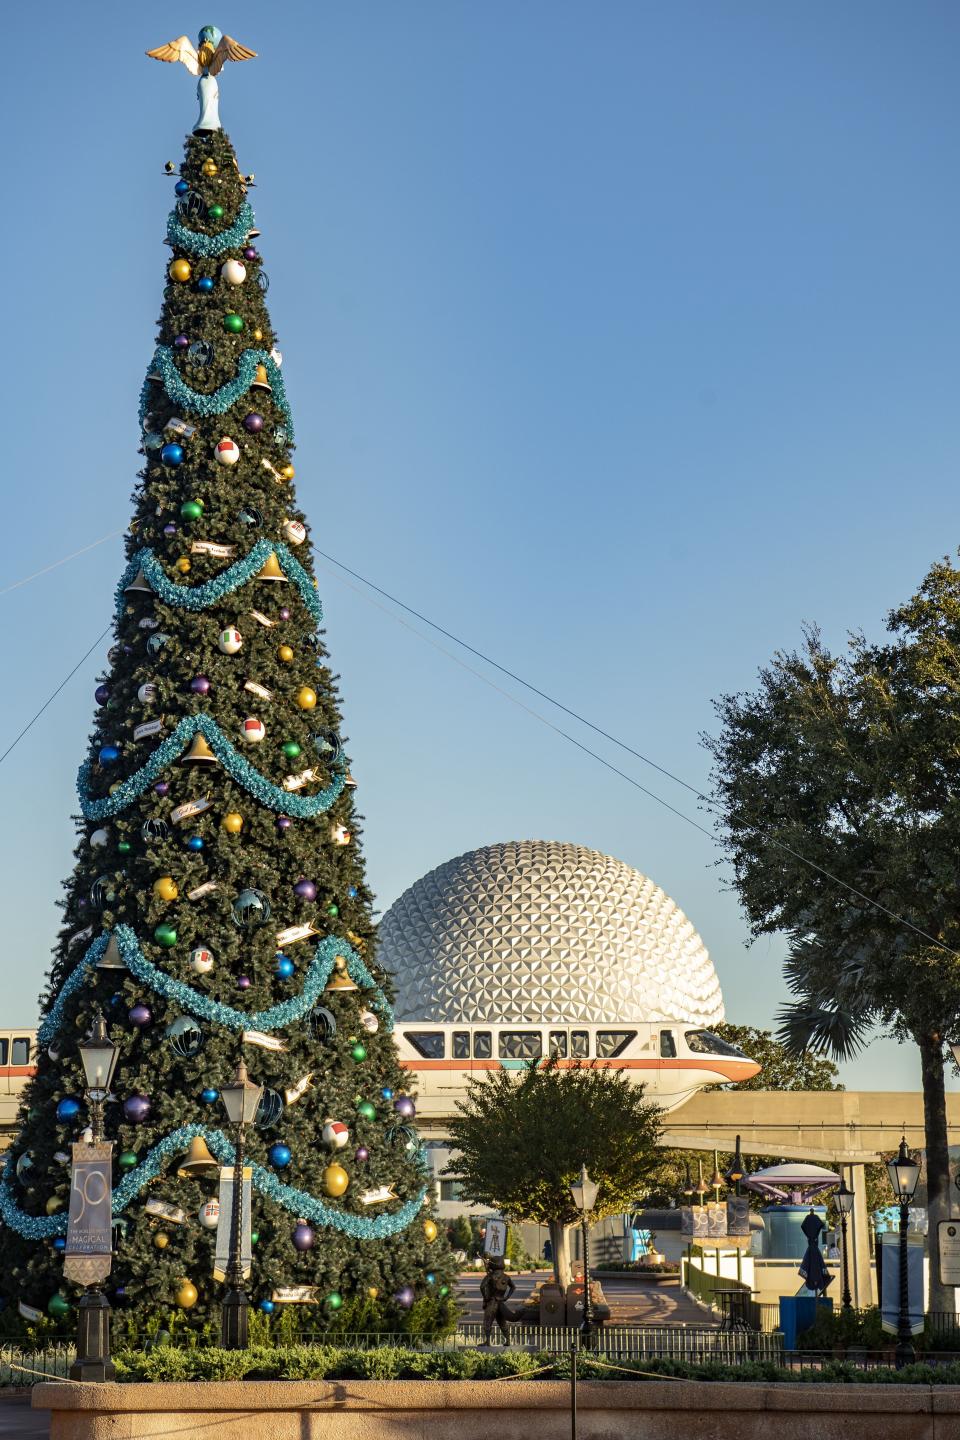 The holiday season is just beginning, and Walt Disney World Resort continues to spread joy with new experiences.